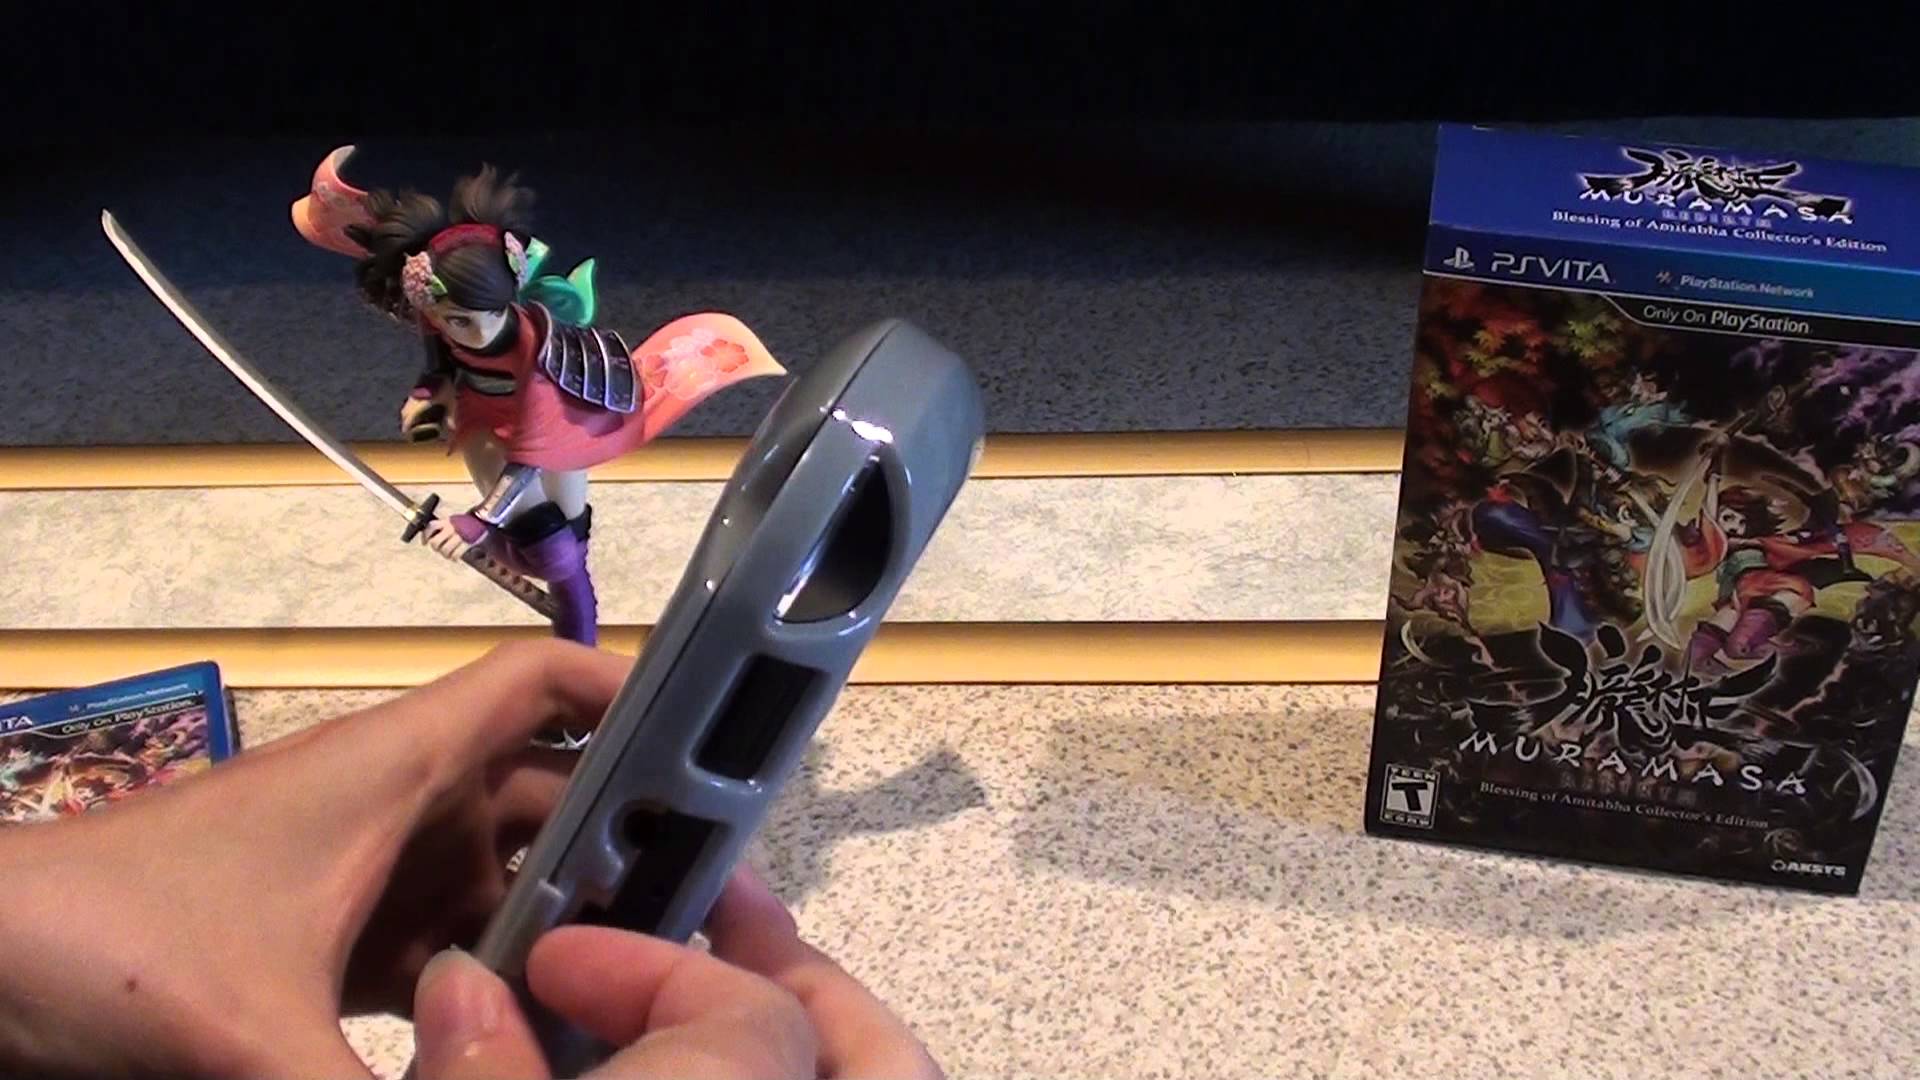 Muramasa Rebirth Blessing of Amitabha Collector's Edition unboxing